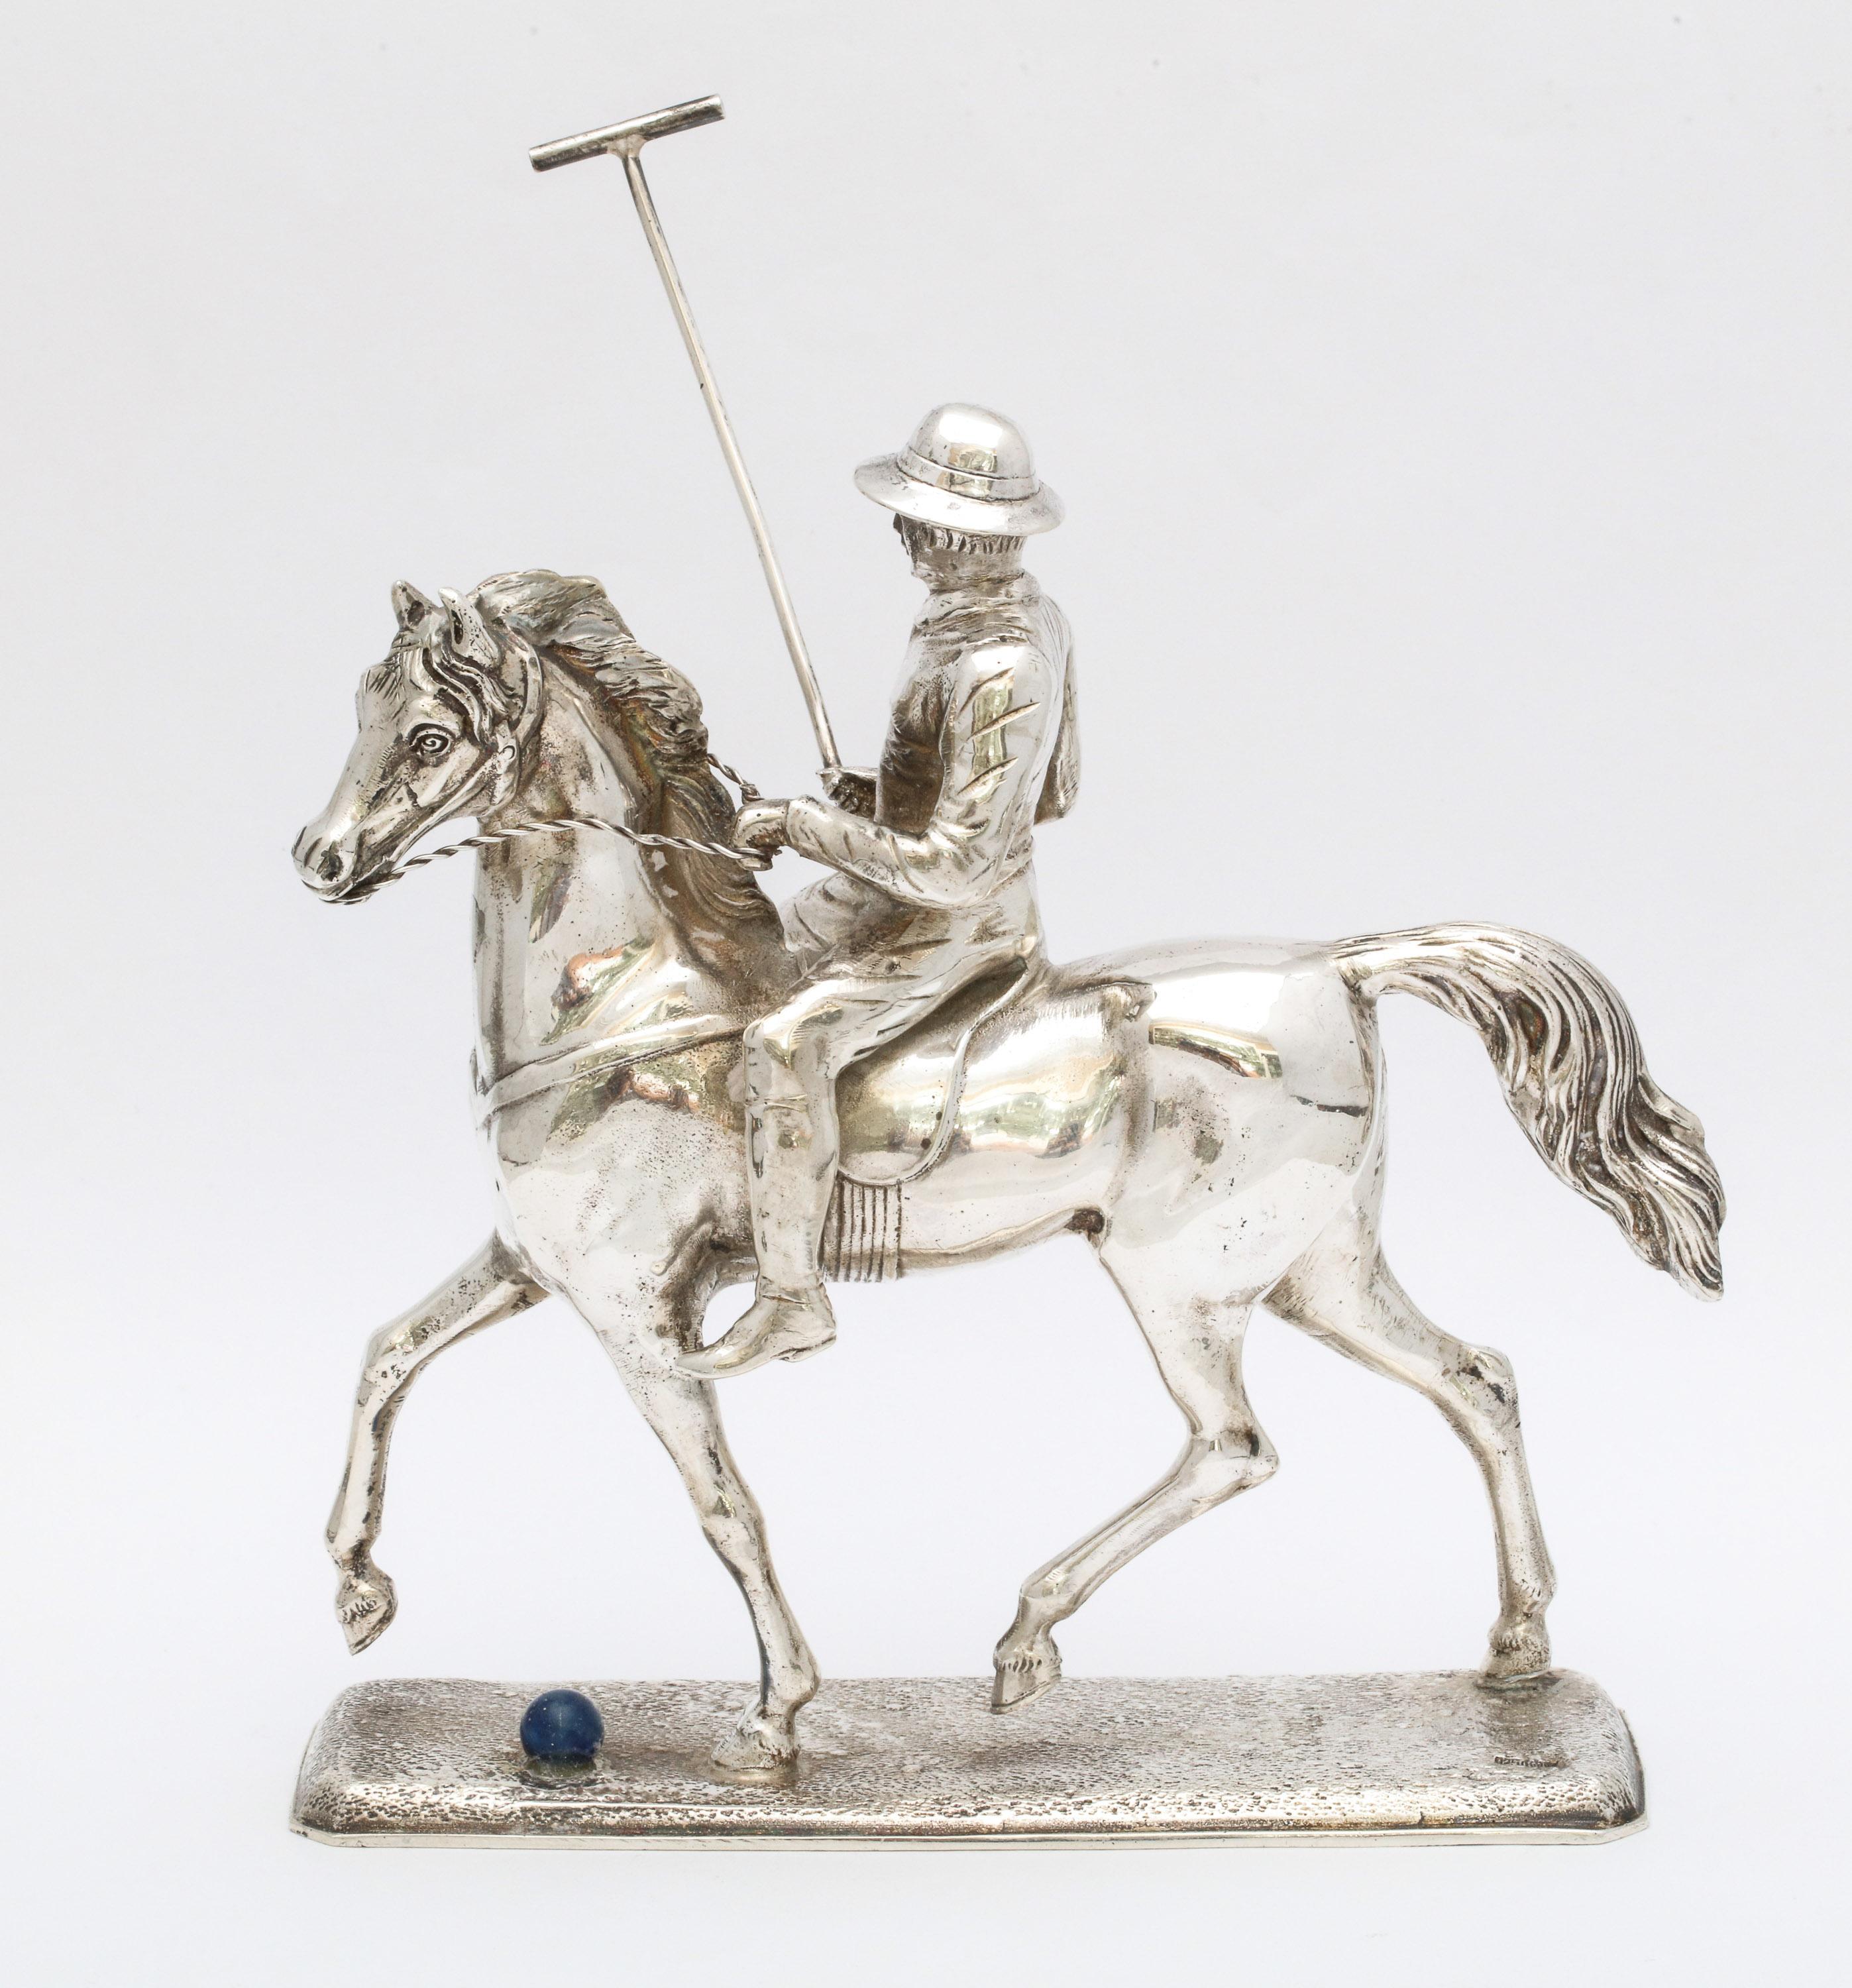 Unusual, Mid-Century Modern sterling silver statuette of a polo player mounted on his horse and holding a polo mallet, Germany, circa 1950s. There is a lapis lazuli polo ball near the horse's front hooves. Measures 7 inches high (to top of mallet) x